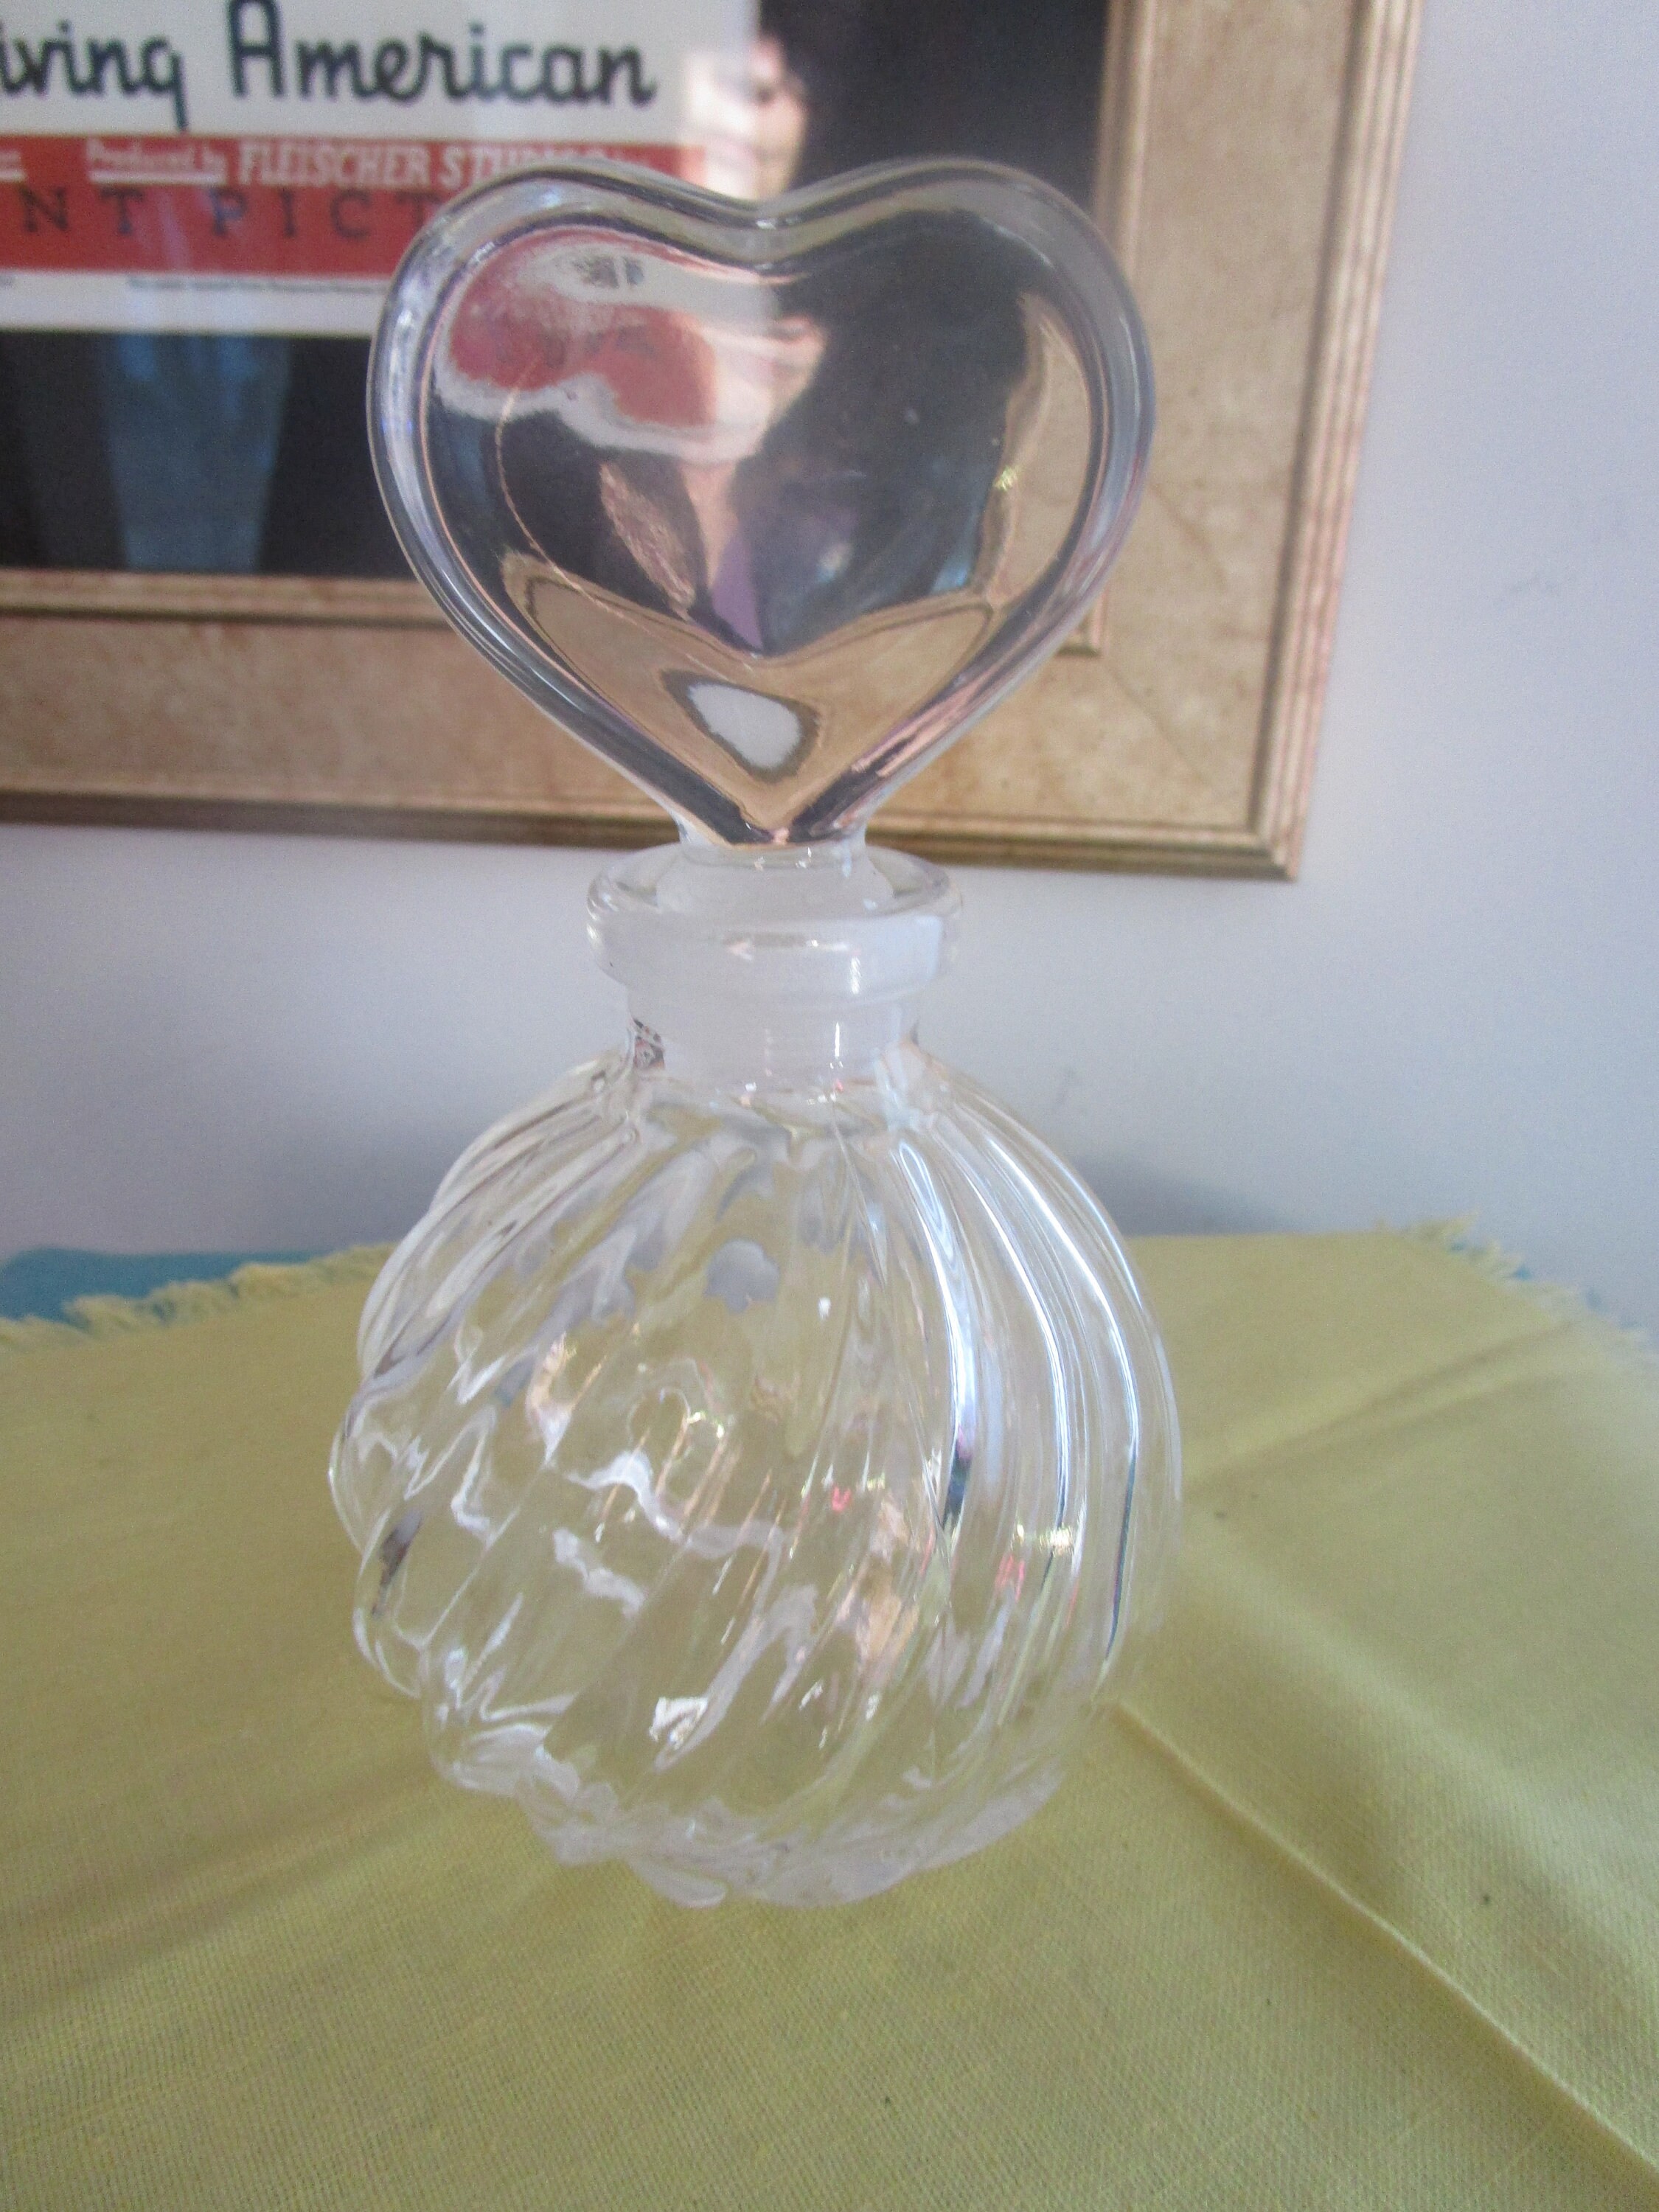 Vintage Heart Shaped Glass Perfume Bottle with Stopper (Set of 2)